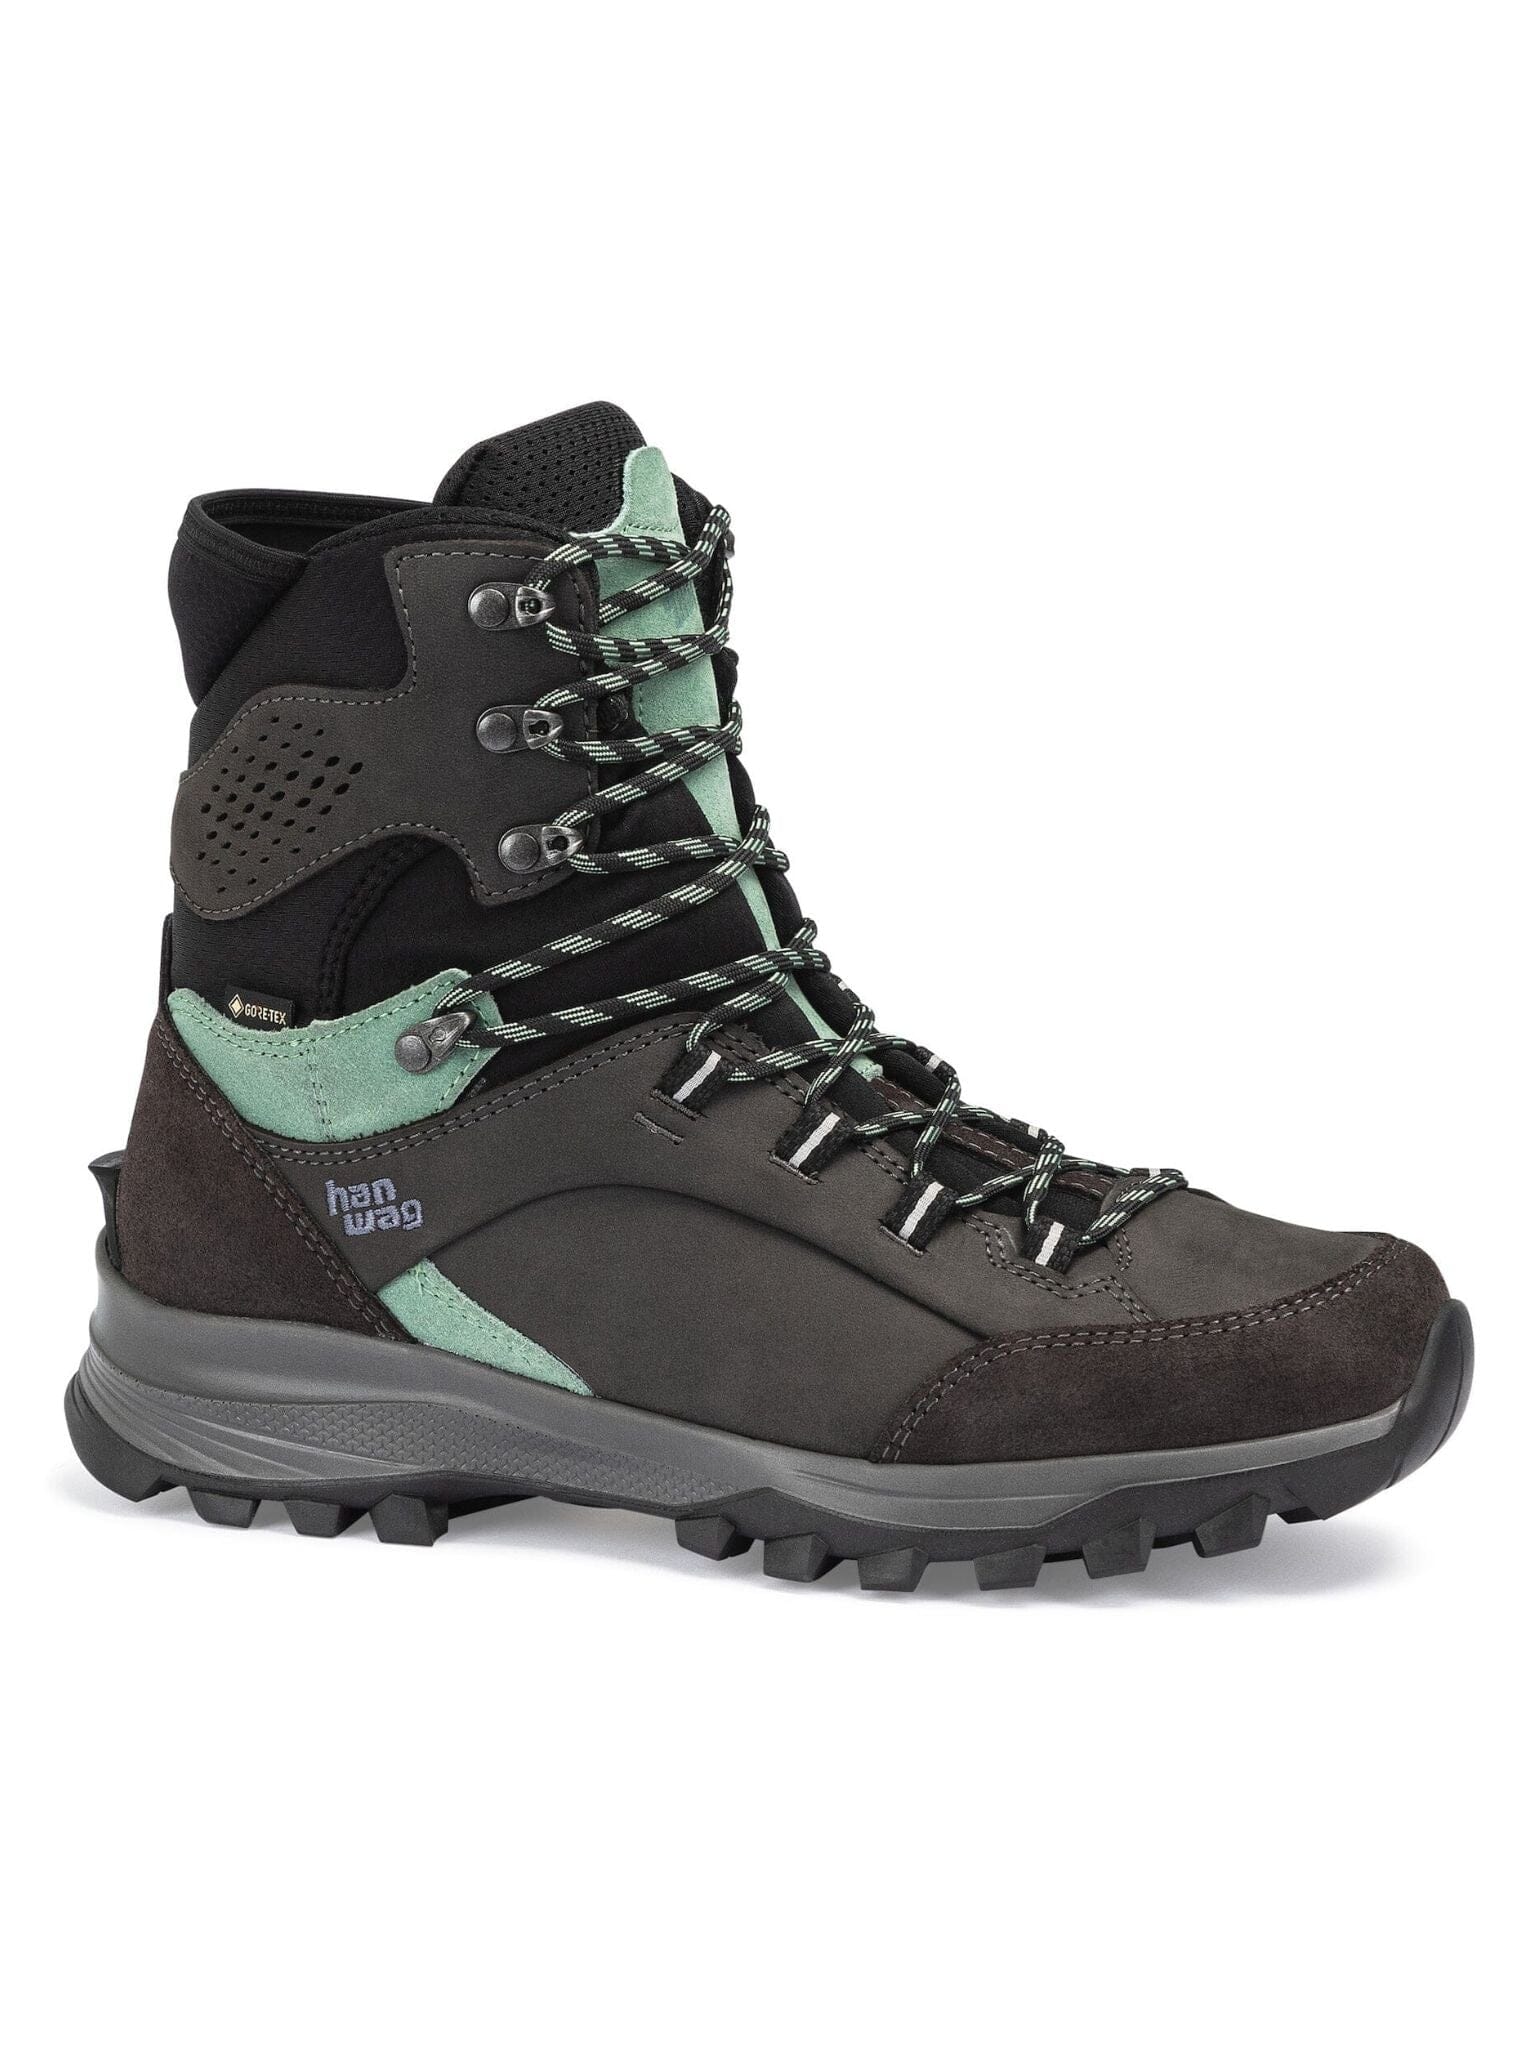 W's Banks Snow GTX Winter Shoes - Leather Working Group -certified nubuck leather - Asphalt/Mint